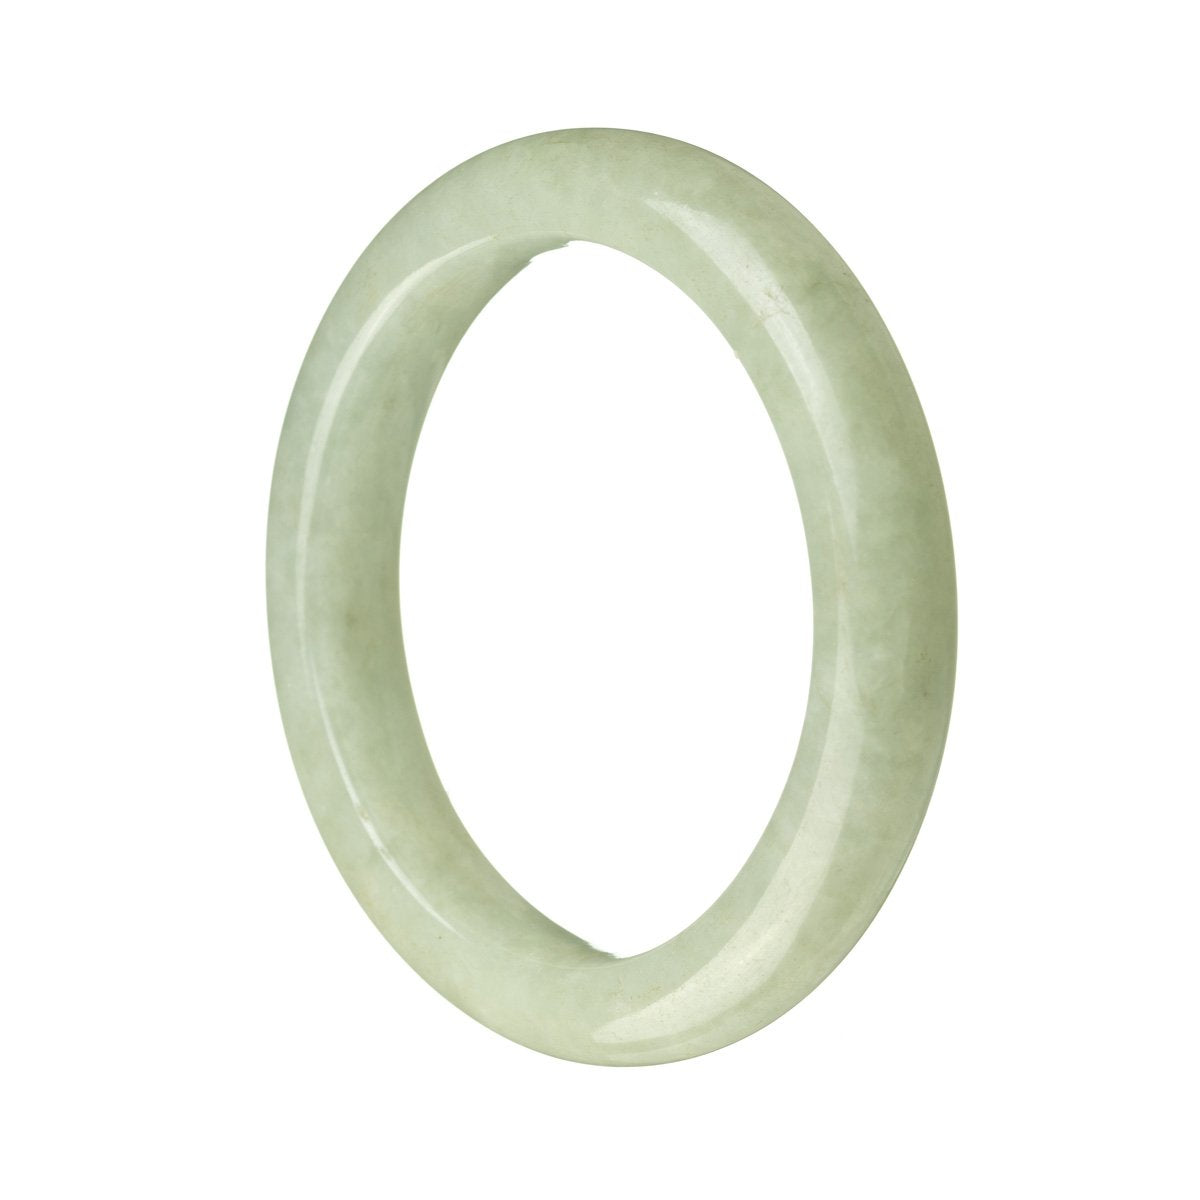 A close-up photo of a green jade bangle with a semi-round shape, measuring 56mm in diameter. The bangle is made of genuine grade A green jadeite jade and is branded as MAYS™.